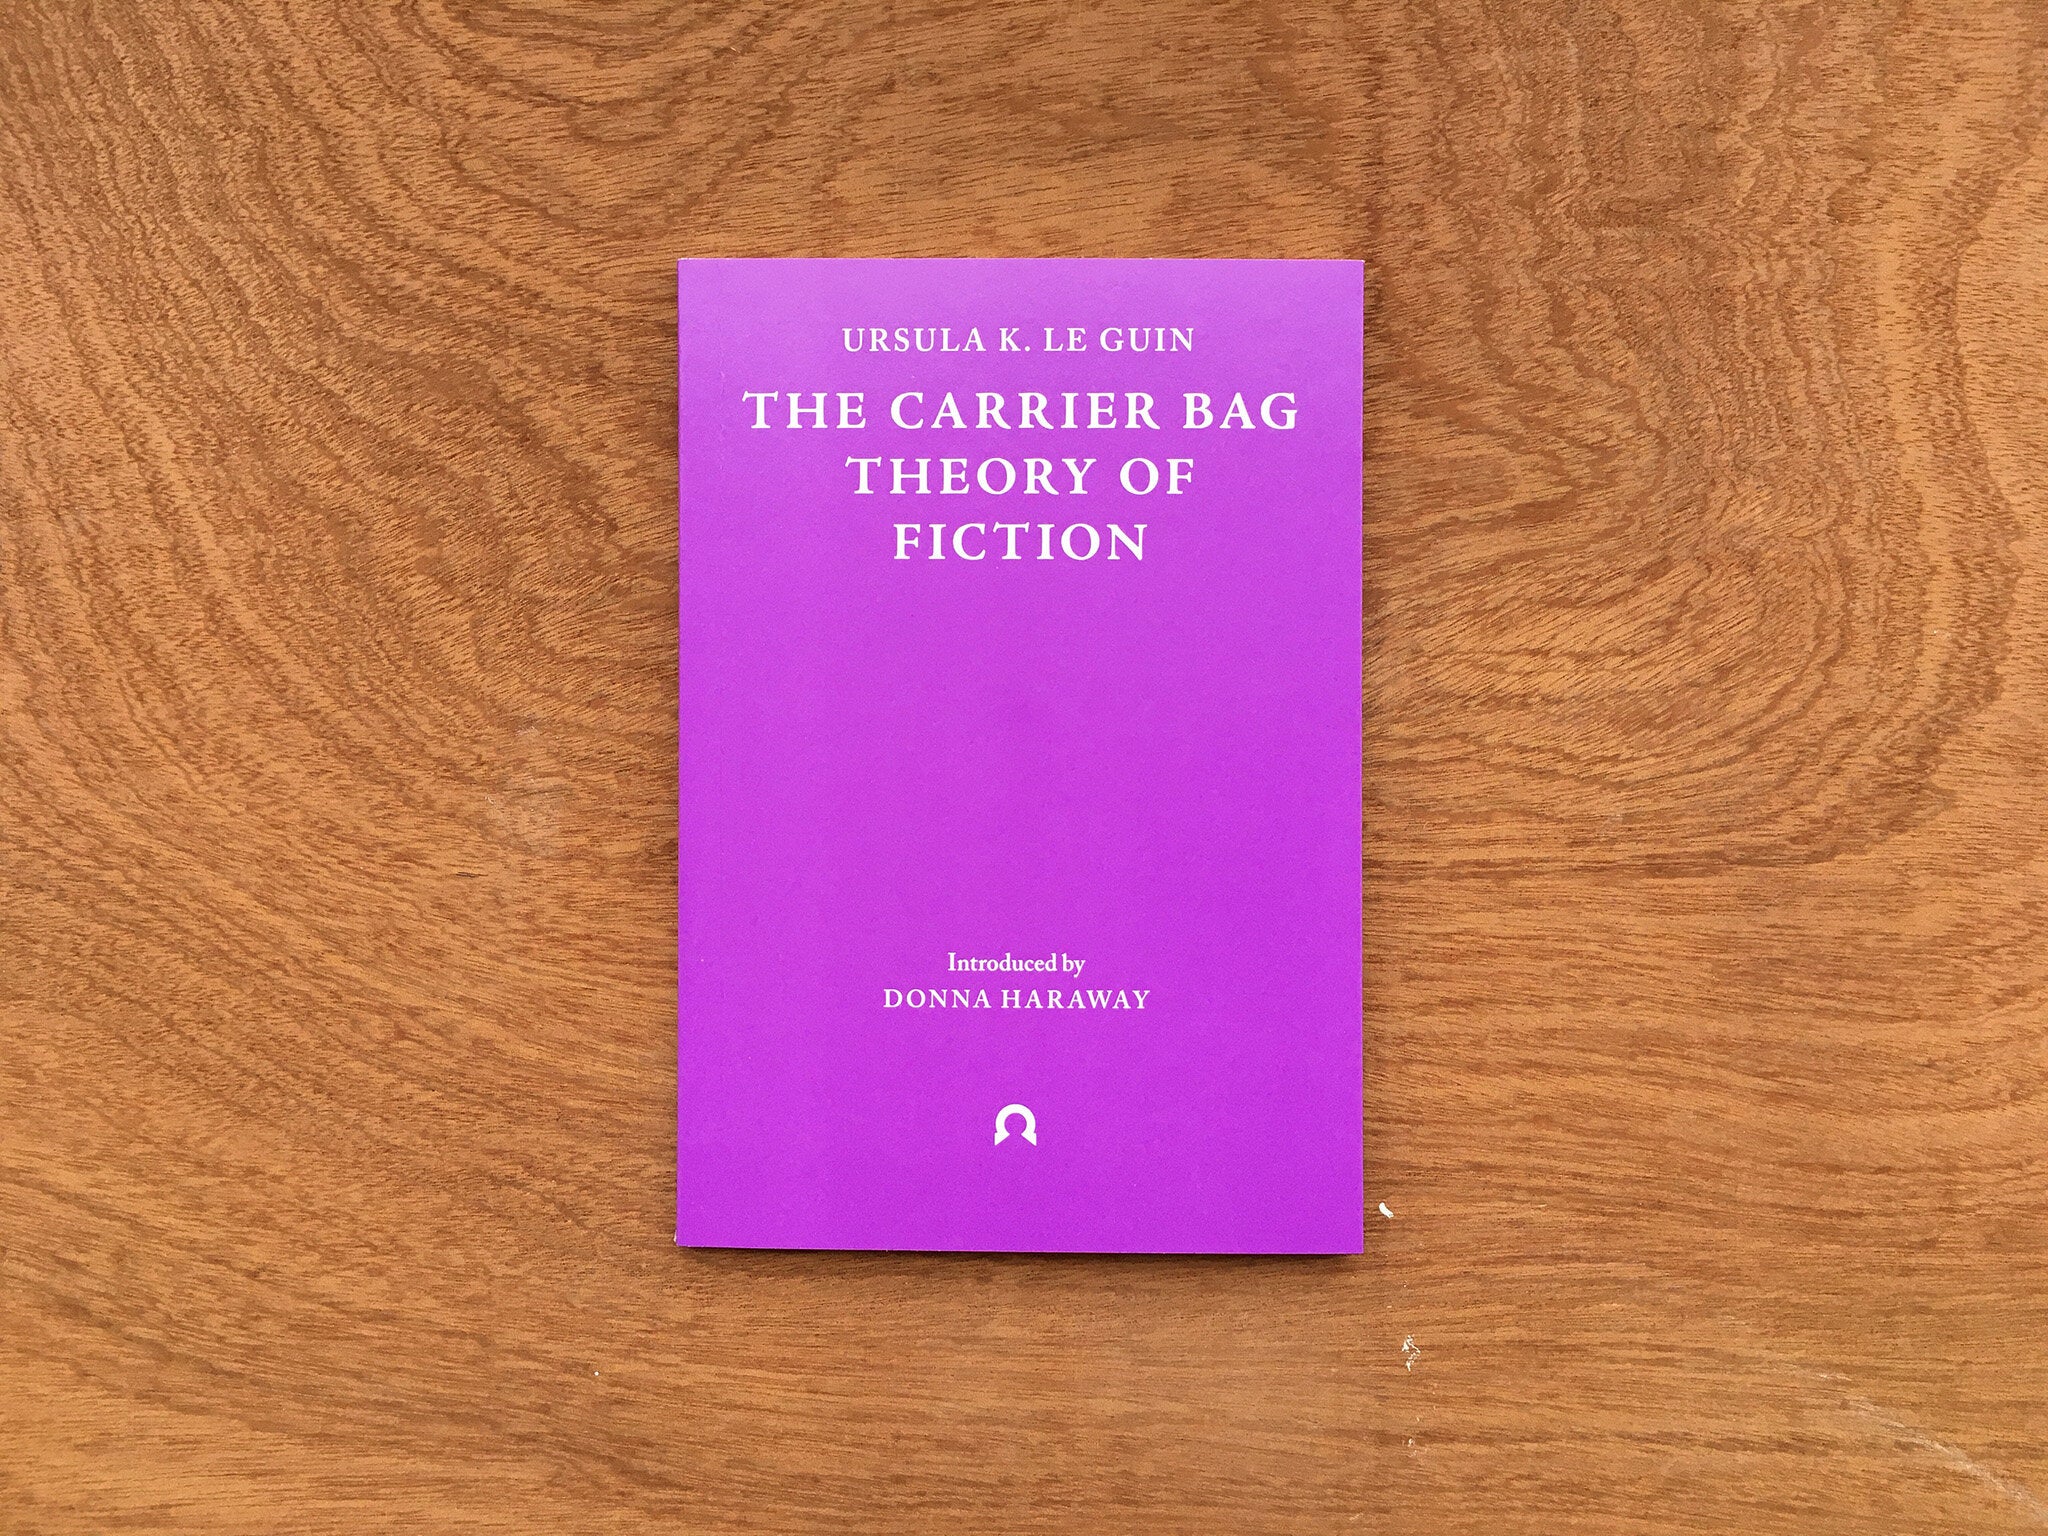 THE CARRIER BAG THEORY OF FICTION by Ursula K. Le Guin